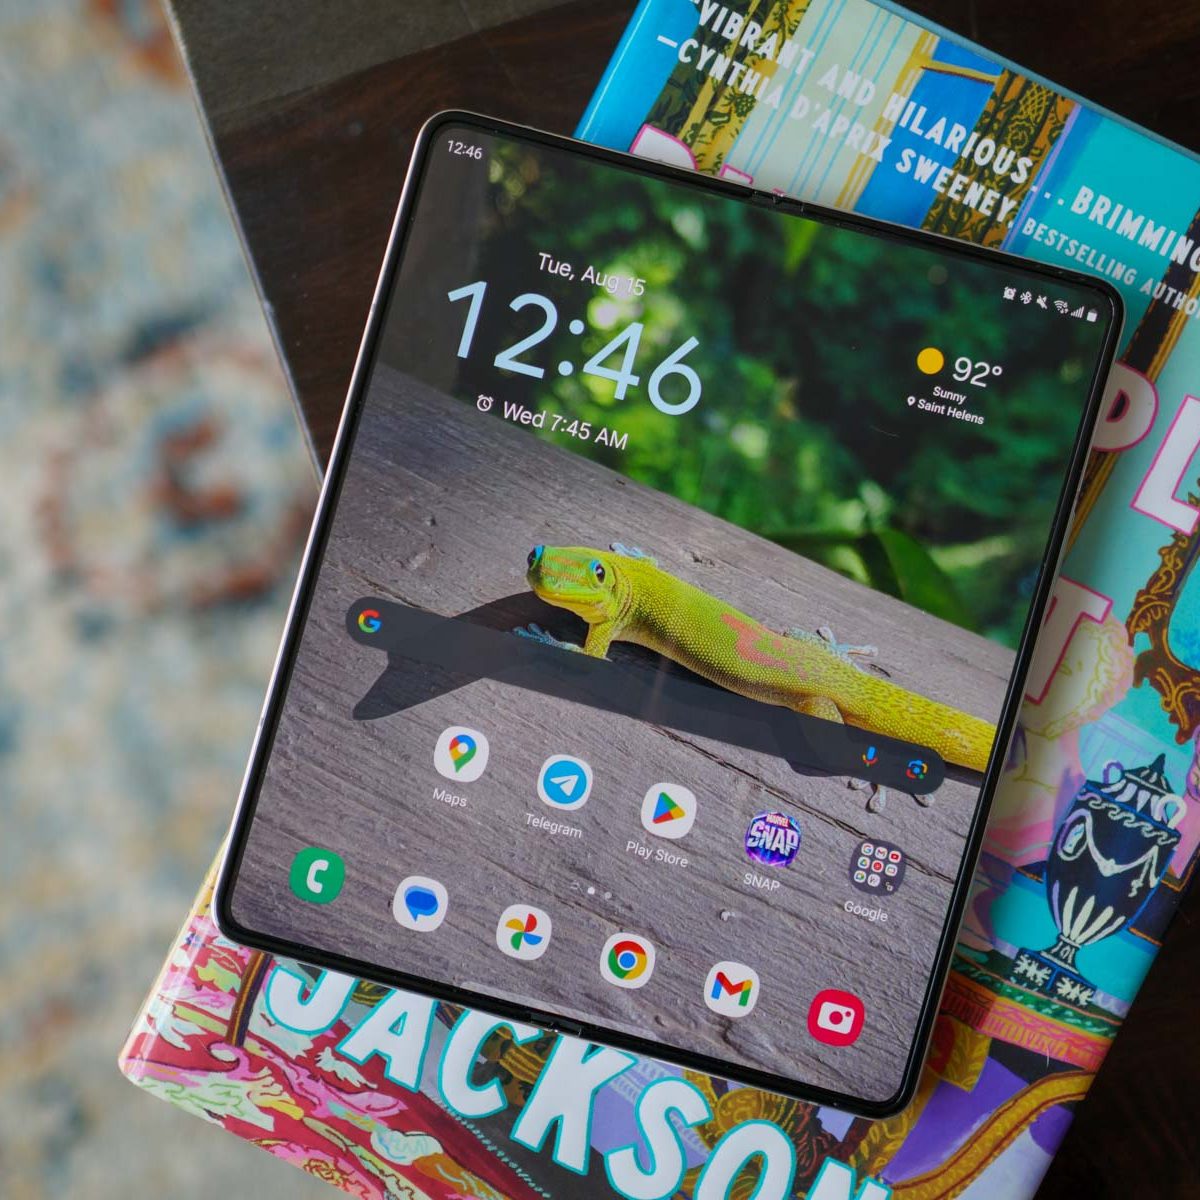 Samsung Galaxy Z Fold 5 Review: Cool, a New Hinge